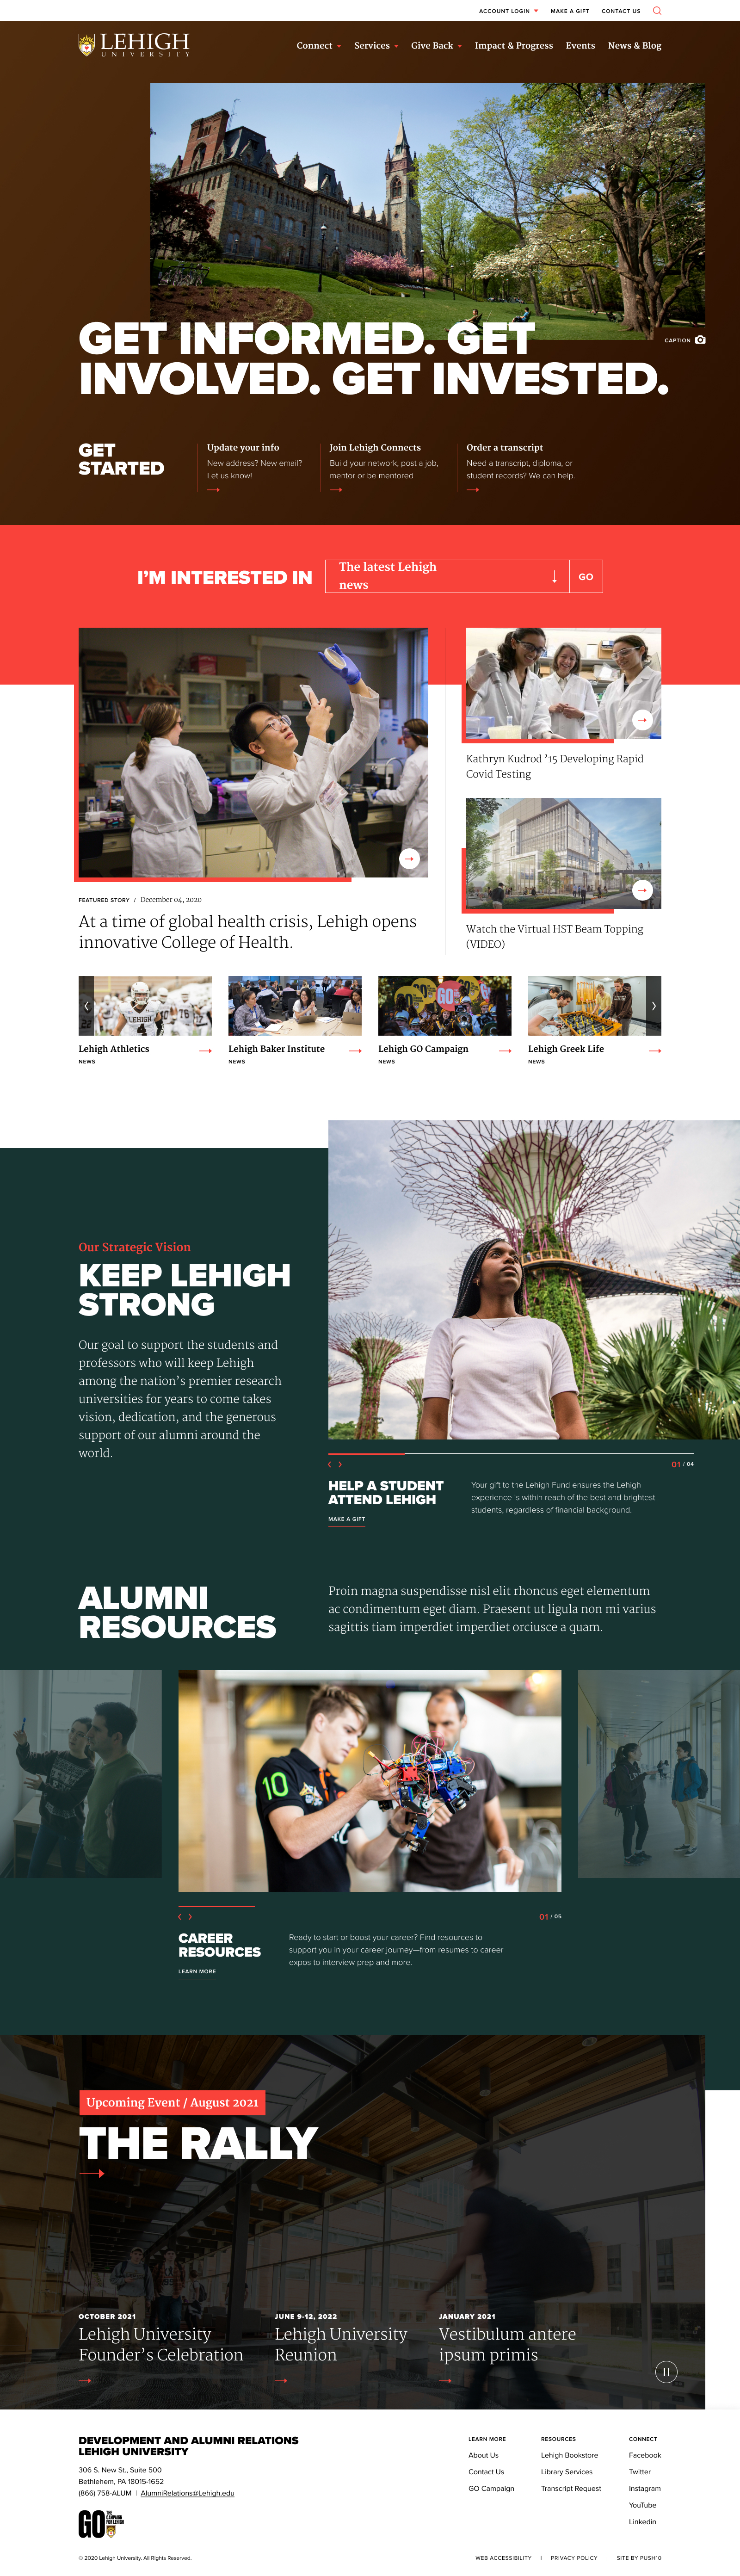 Homepage design for Lehigh University Office of Development and Alumni Relations